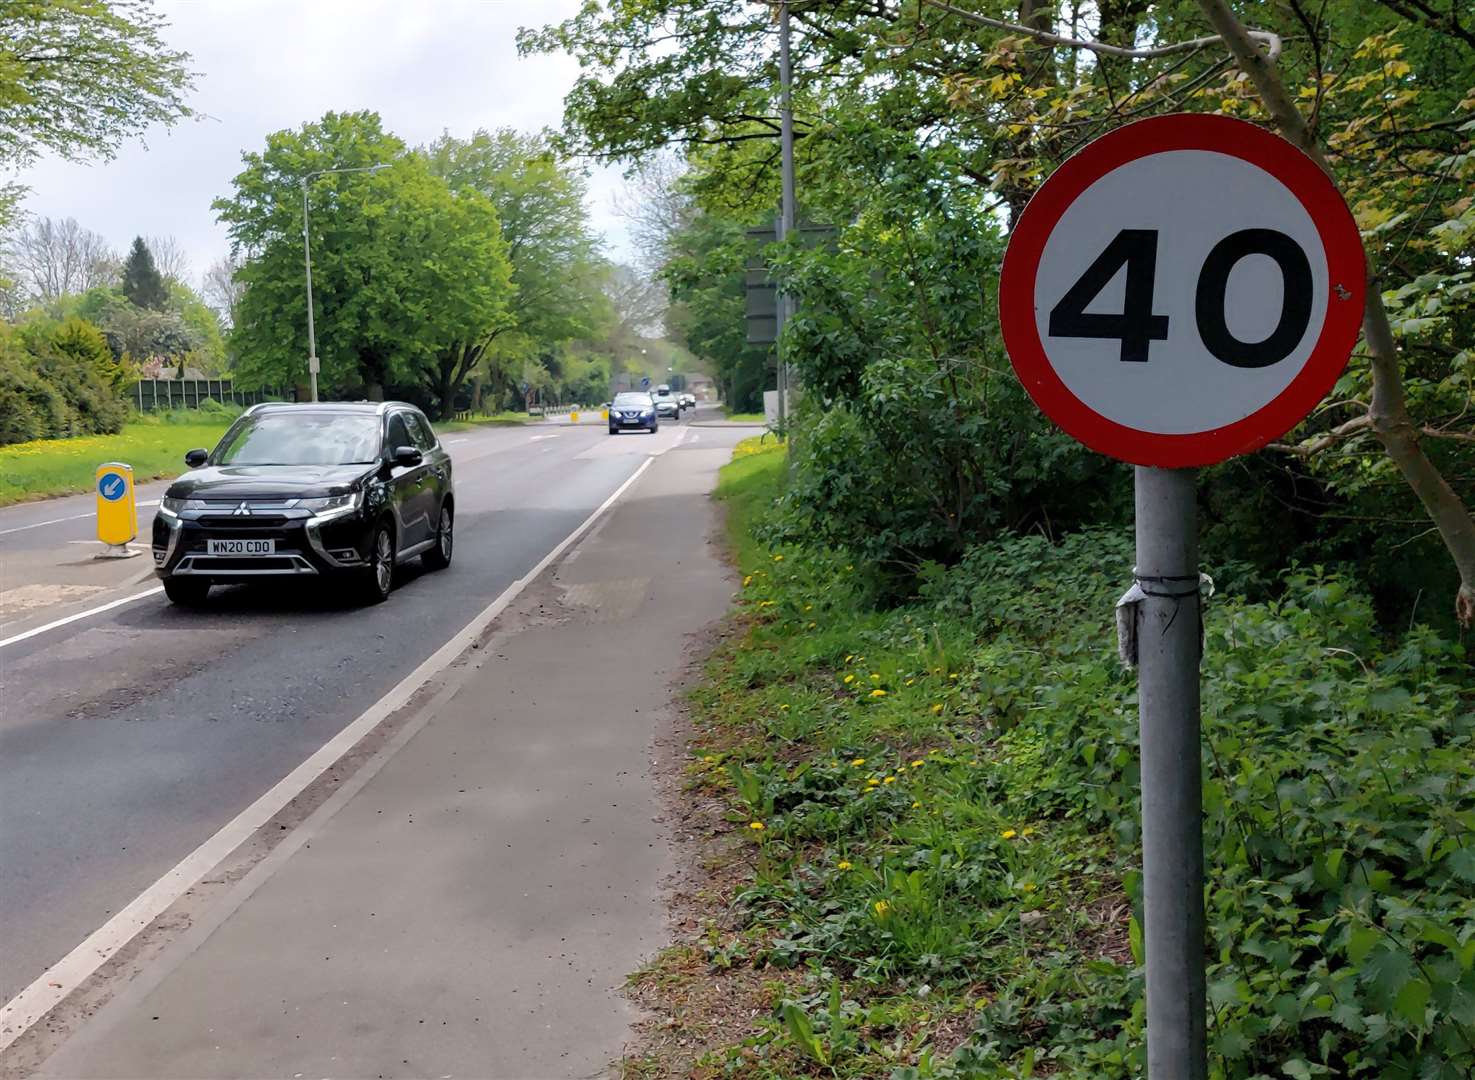 Villagers want the 40mph limit to be reduced to 30mph